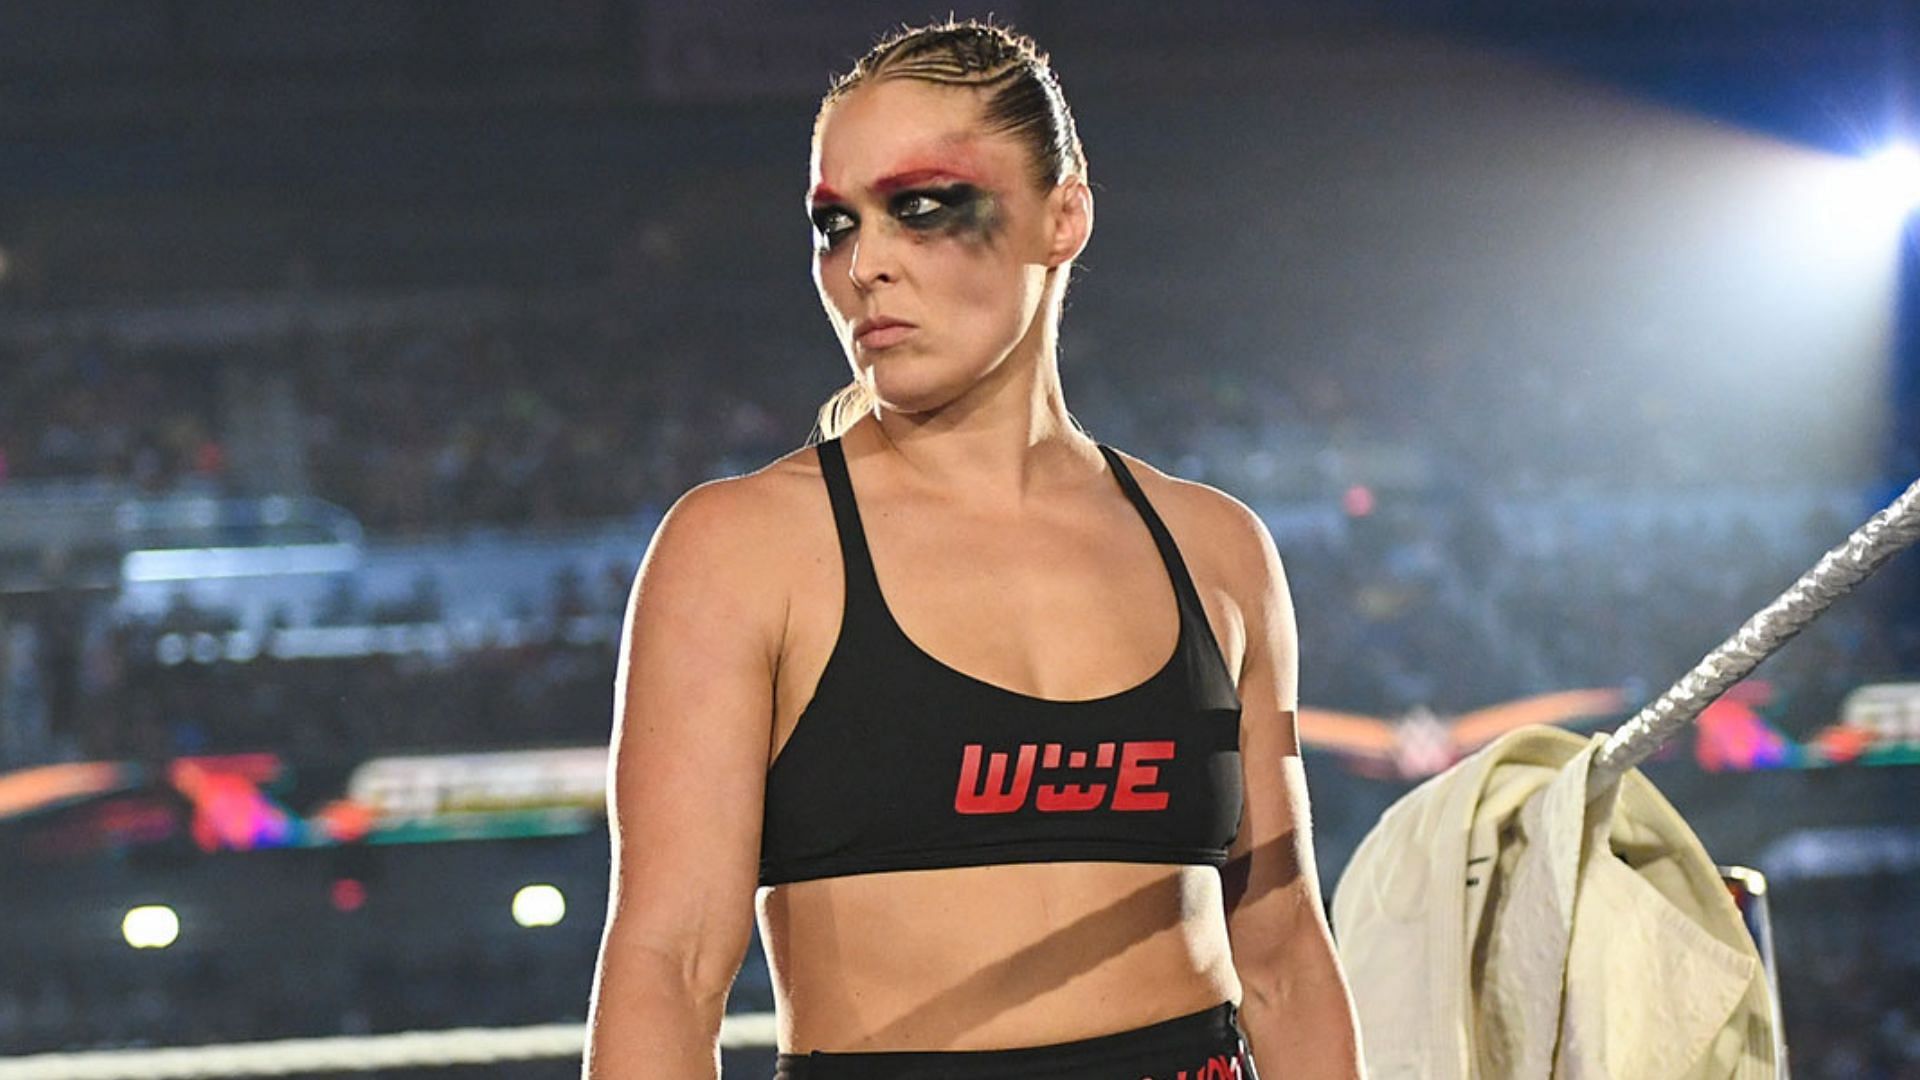 What was different about Ronda Rousey